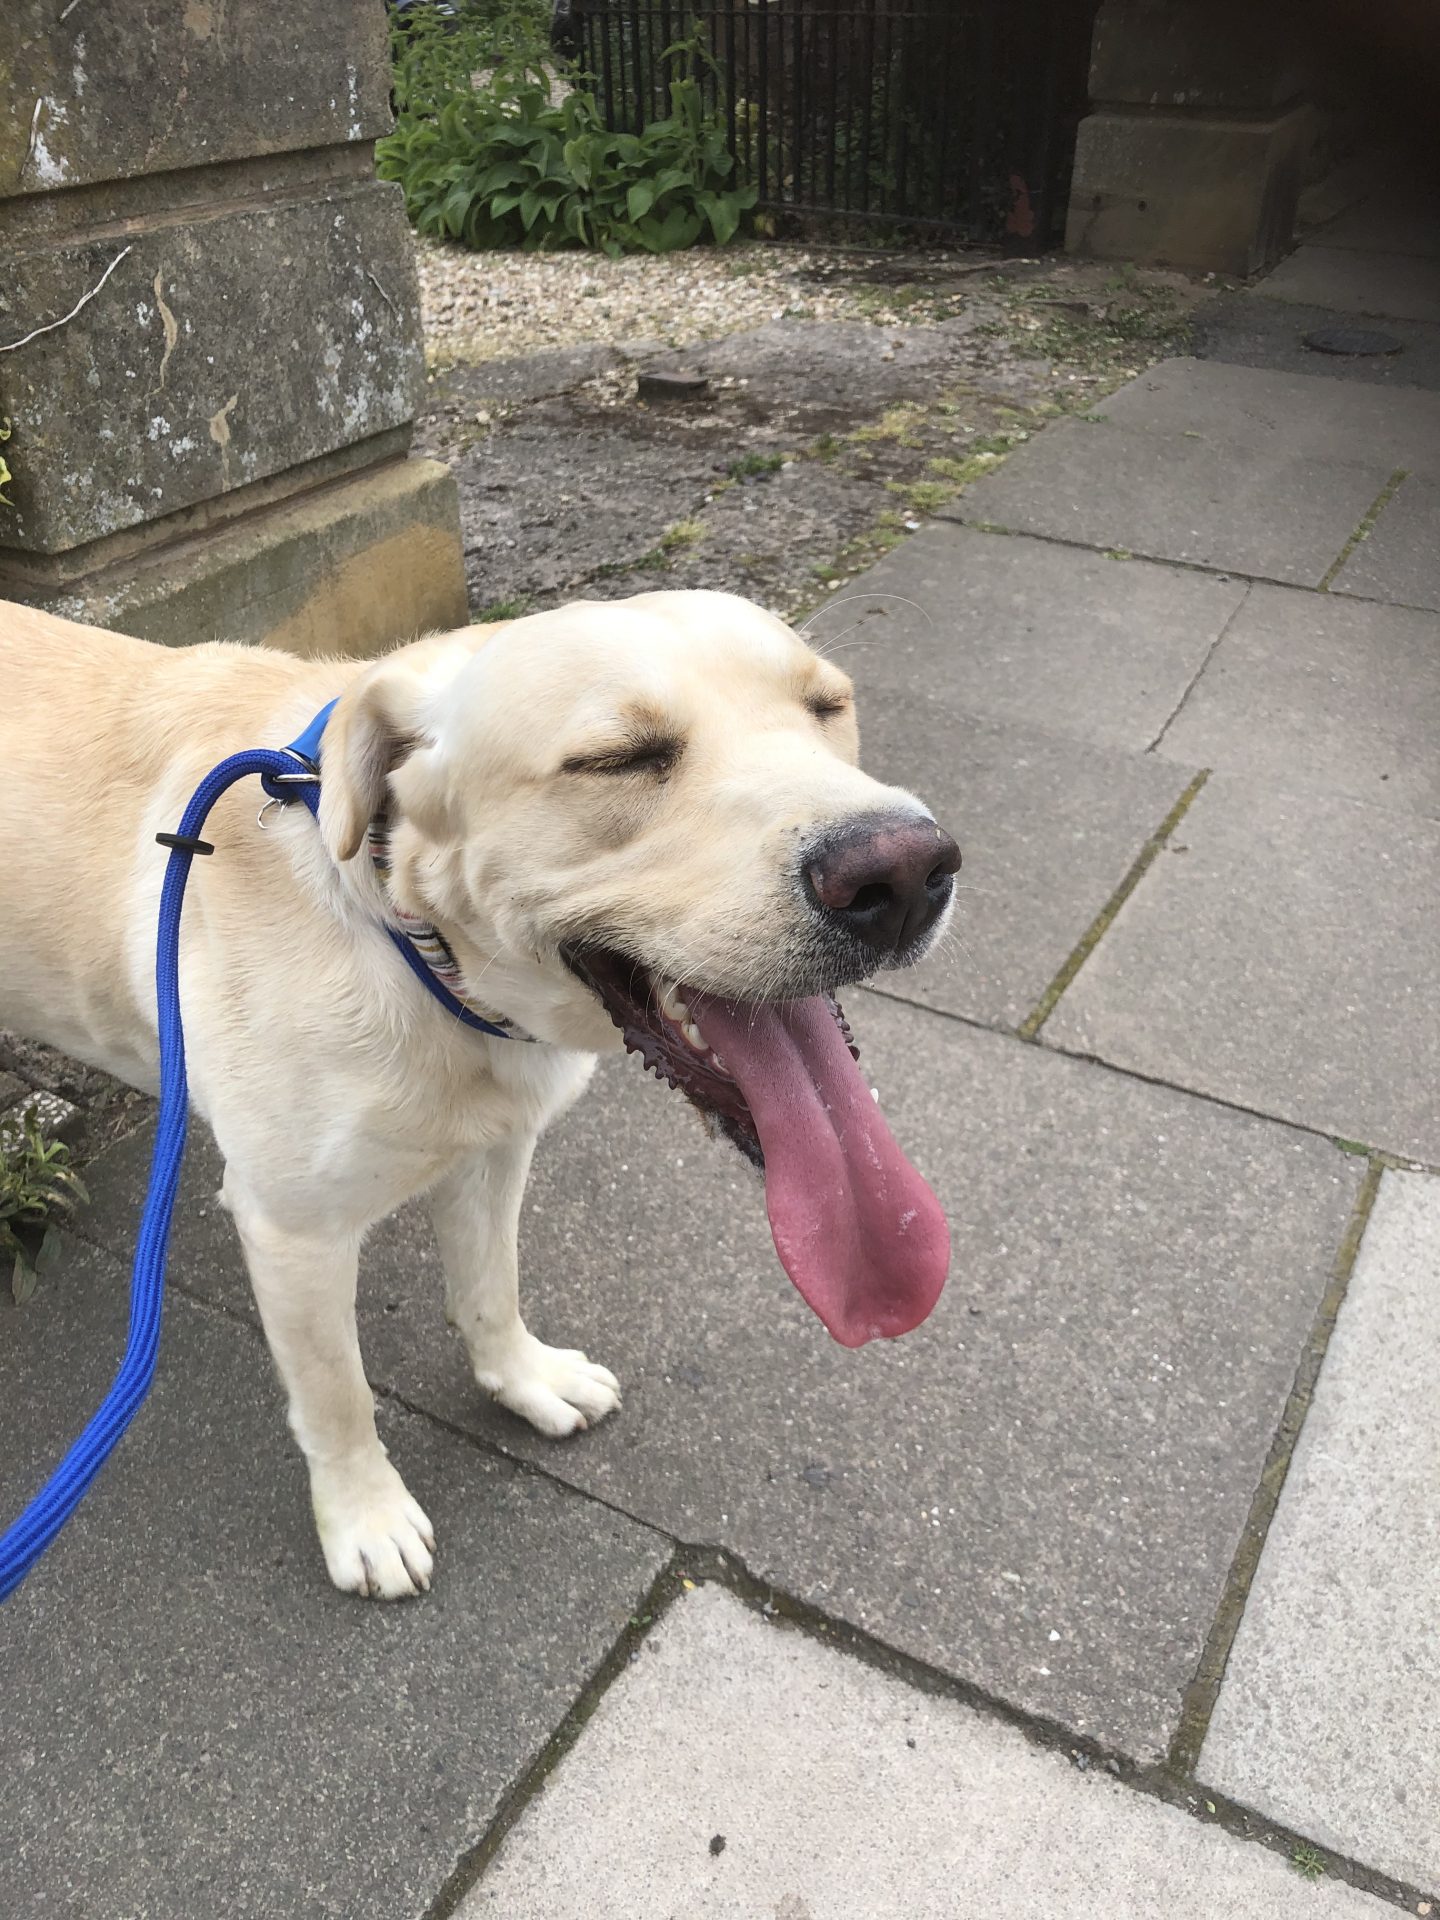 A Labrador with the longest tongue sticking out of his mouth!